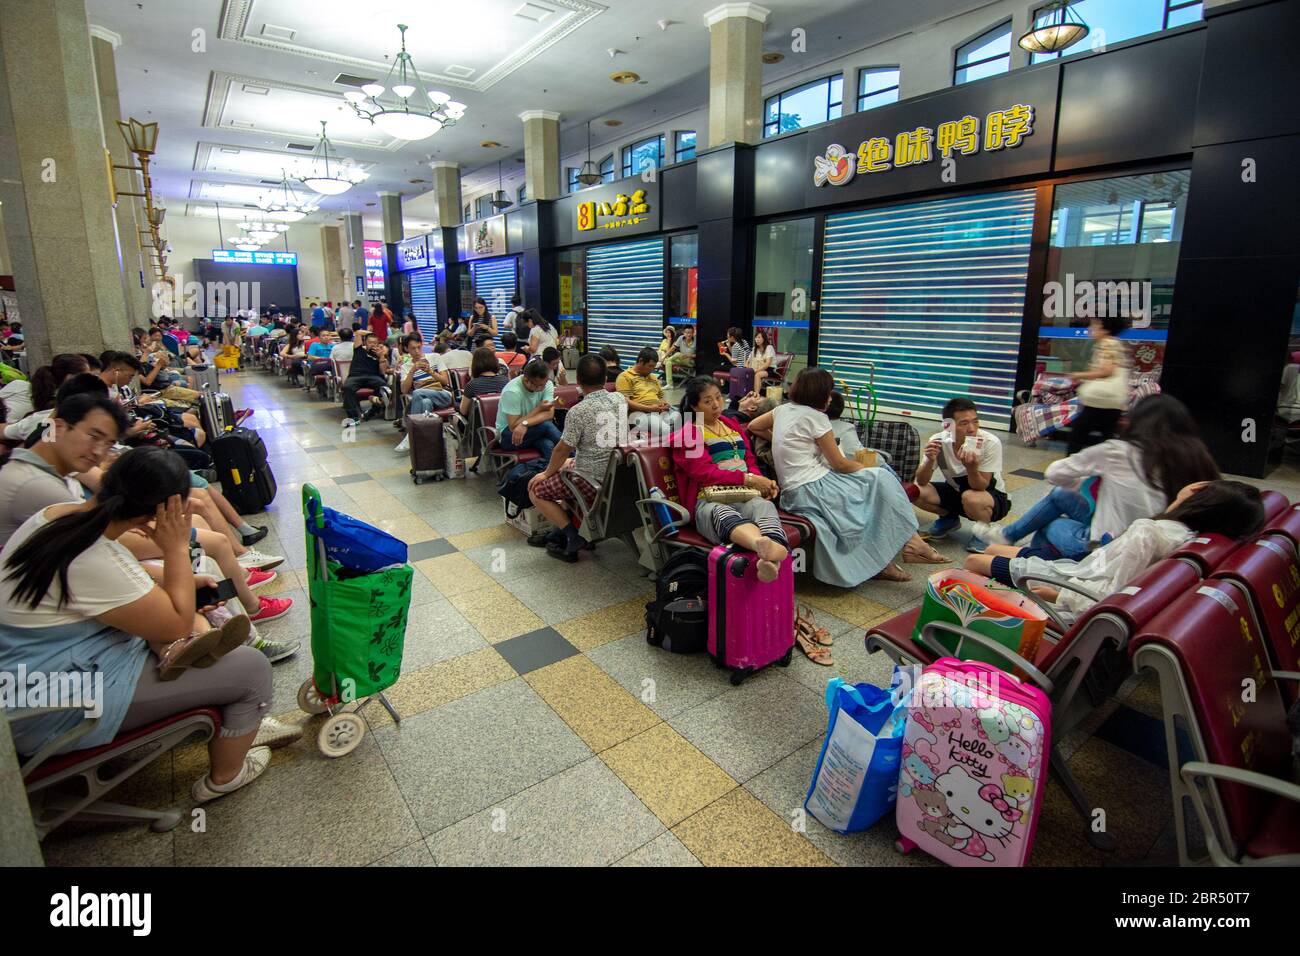 Beijing / China - July 23, 2016: People waiting for trains in Beijing main railway station Stock Photo